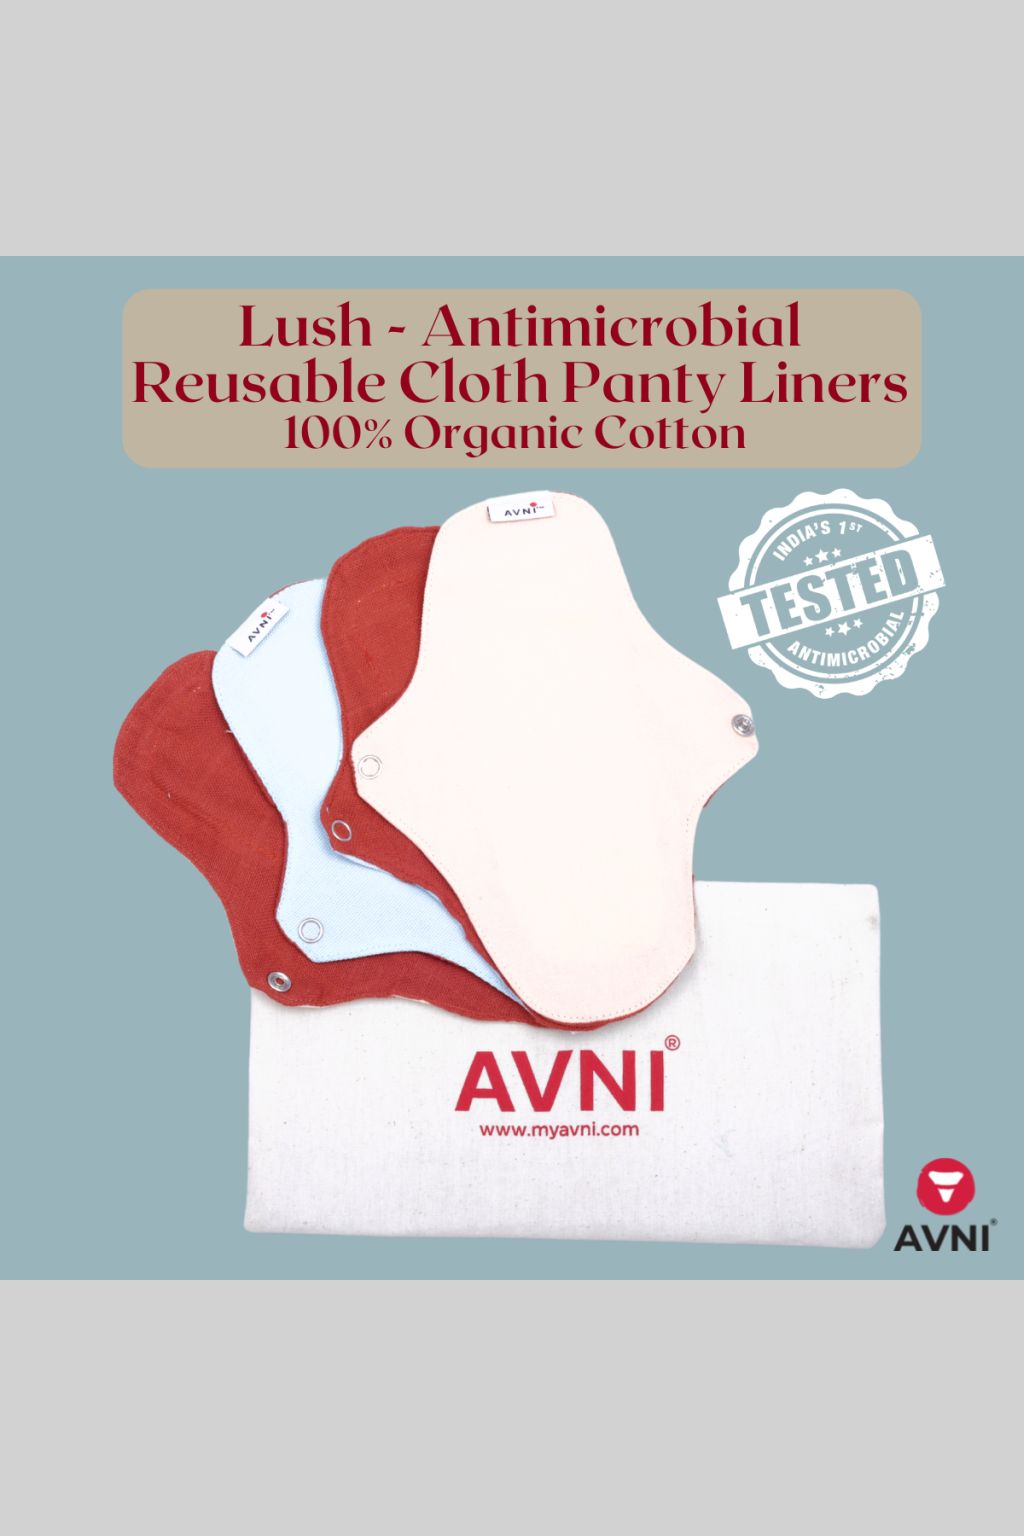 Buy Avni - Fluff Washable Cloth Panty Liner, Antimicrobial